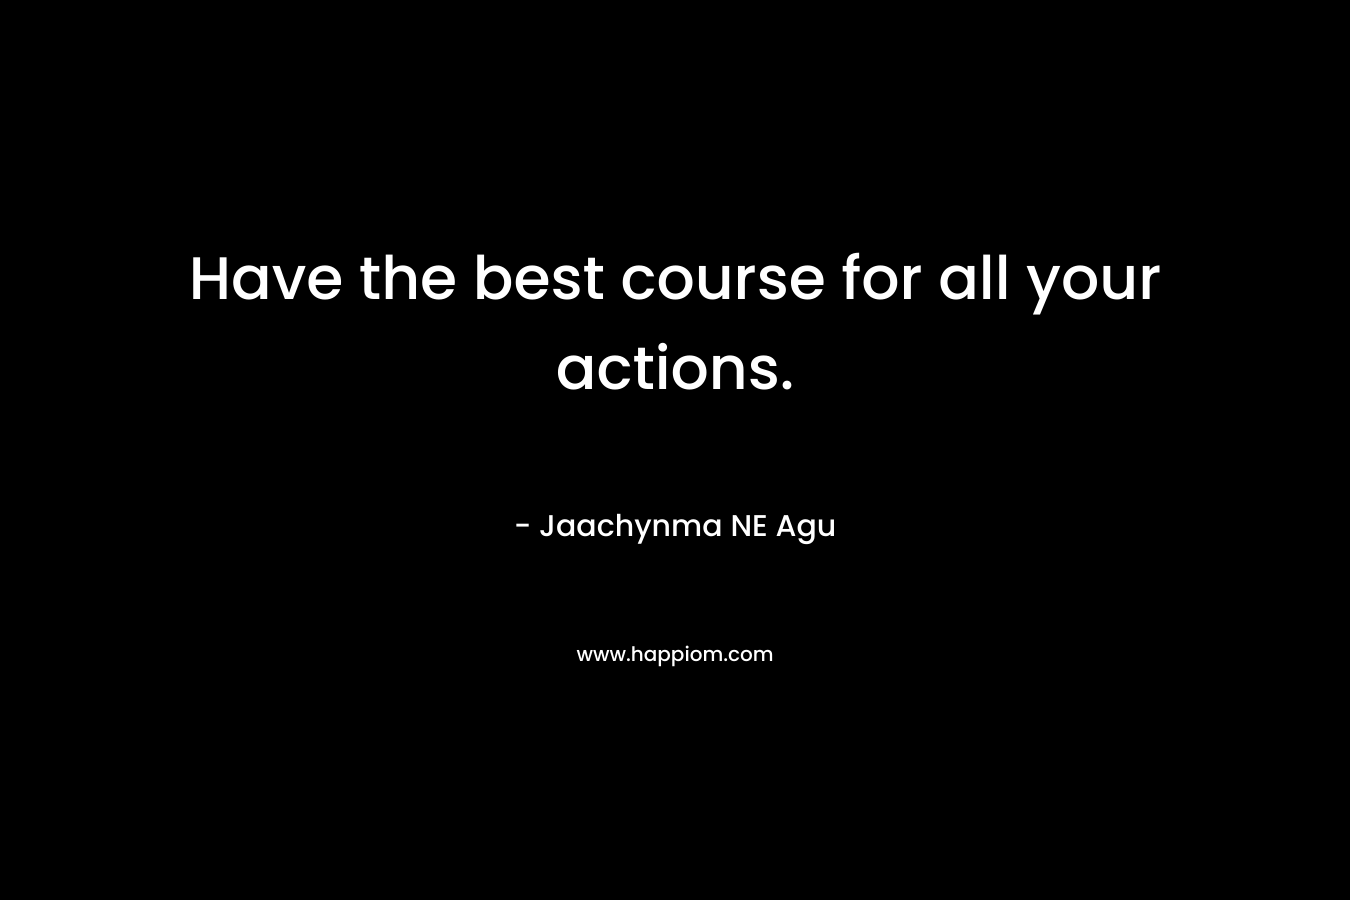 Have the best course for all your actions.